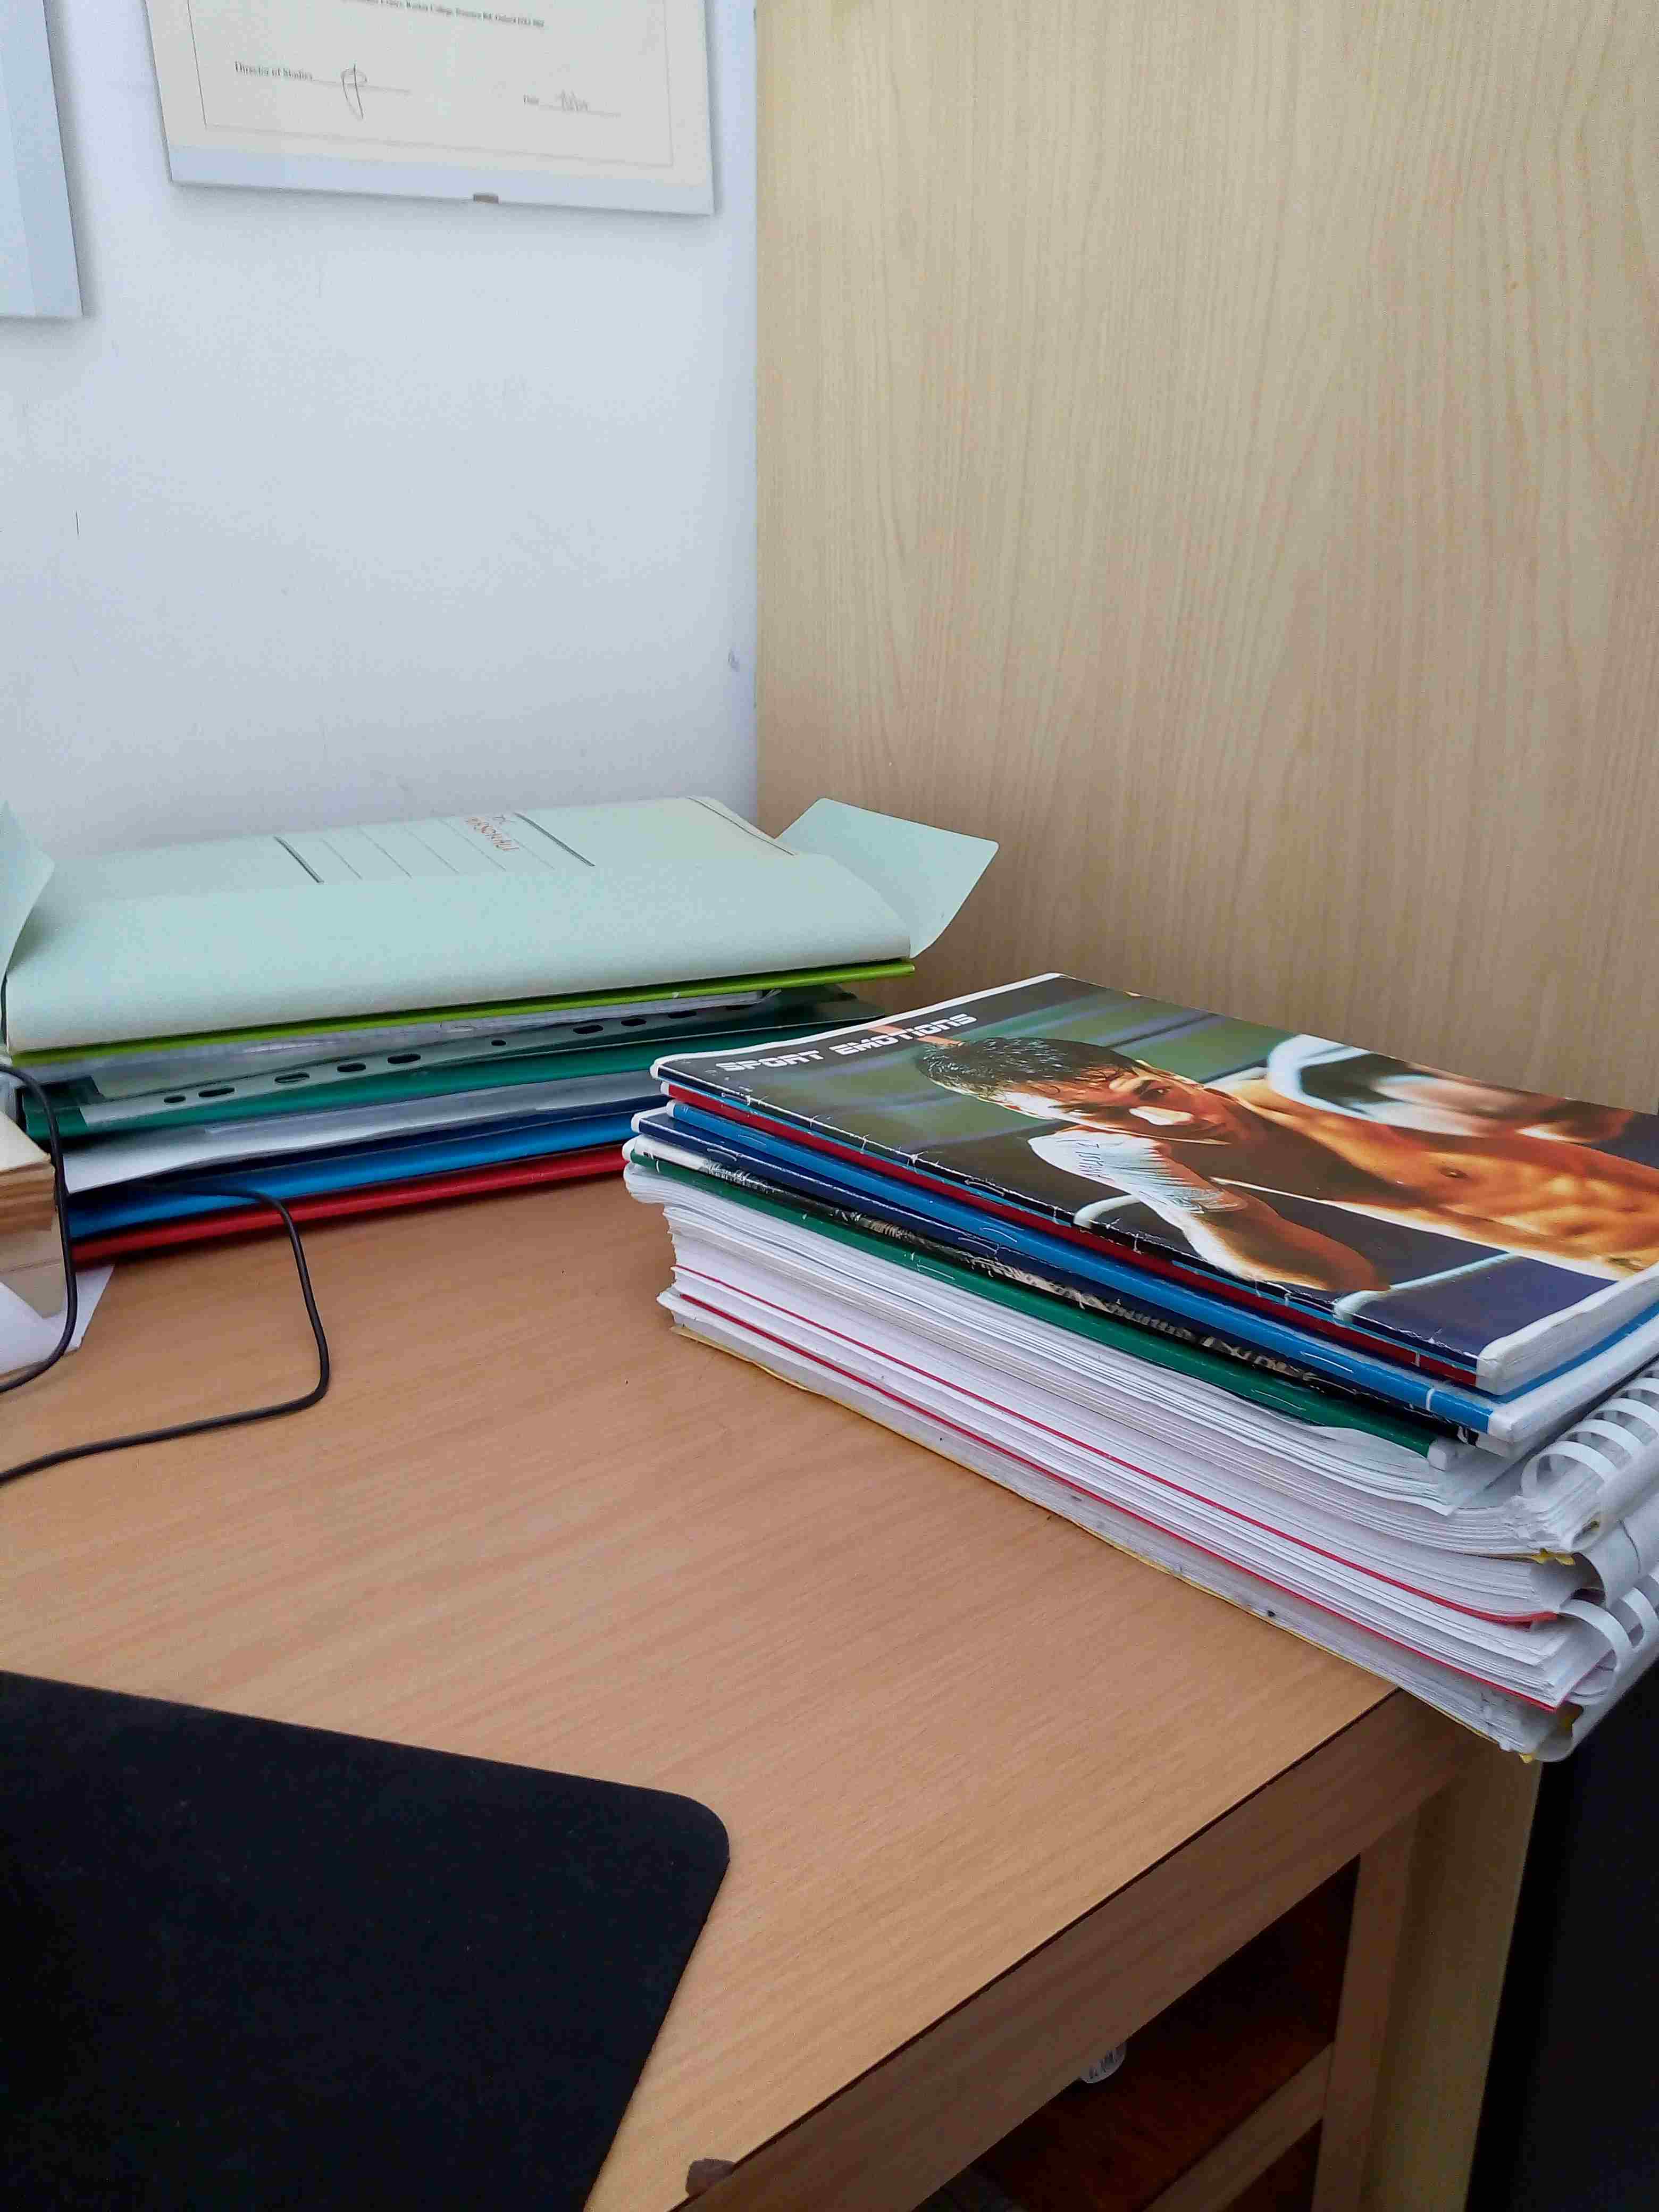 Some copybooks and folders filled with maths.